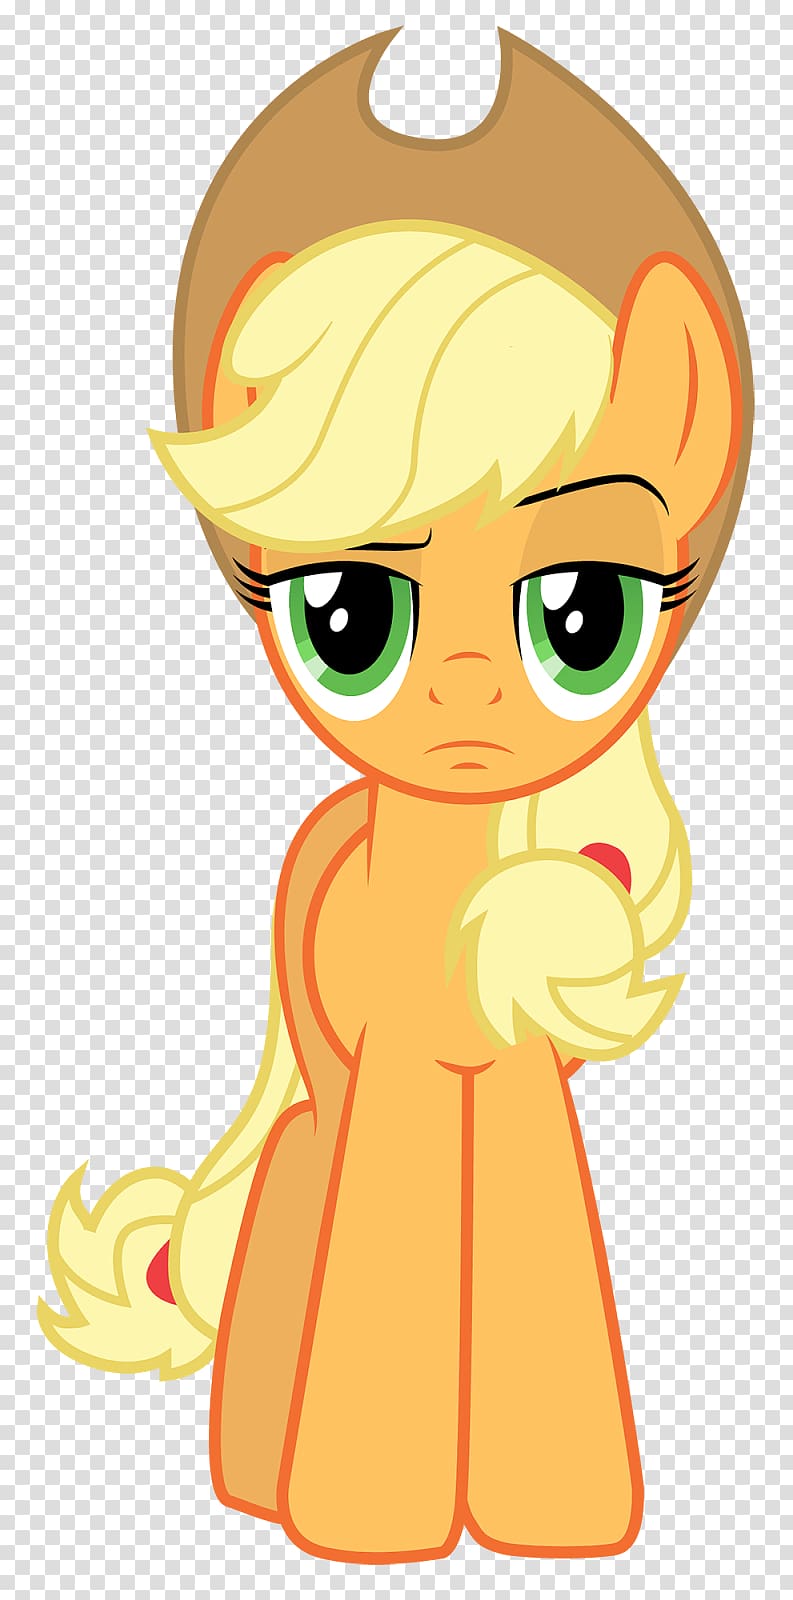 Applejack Pony Fluttershy Equestria Daily Horse, horse transparent background PNG clipart